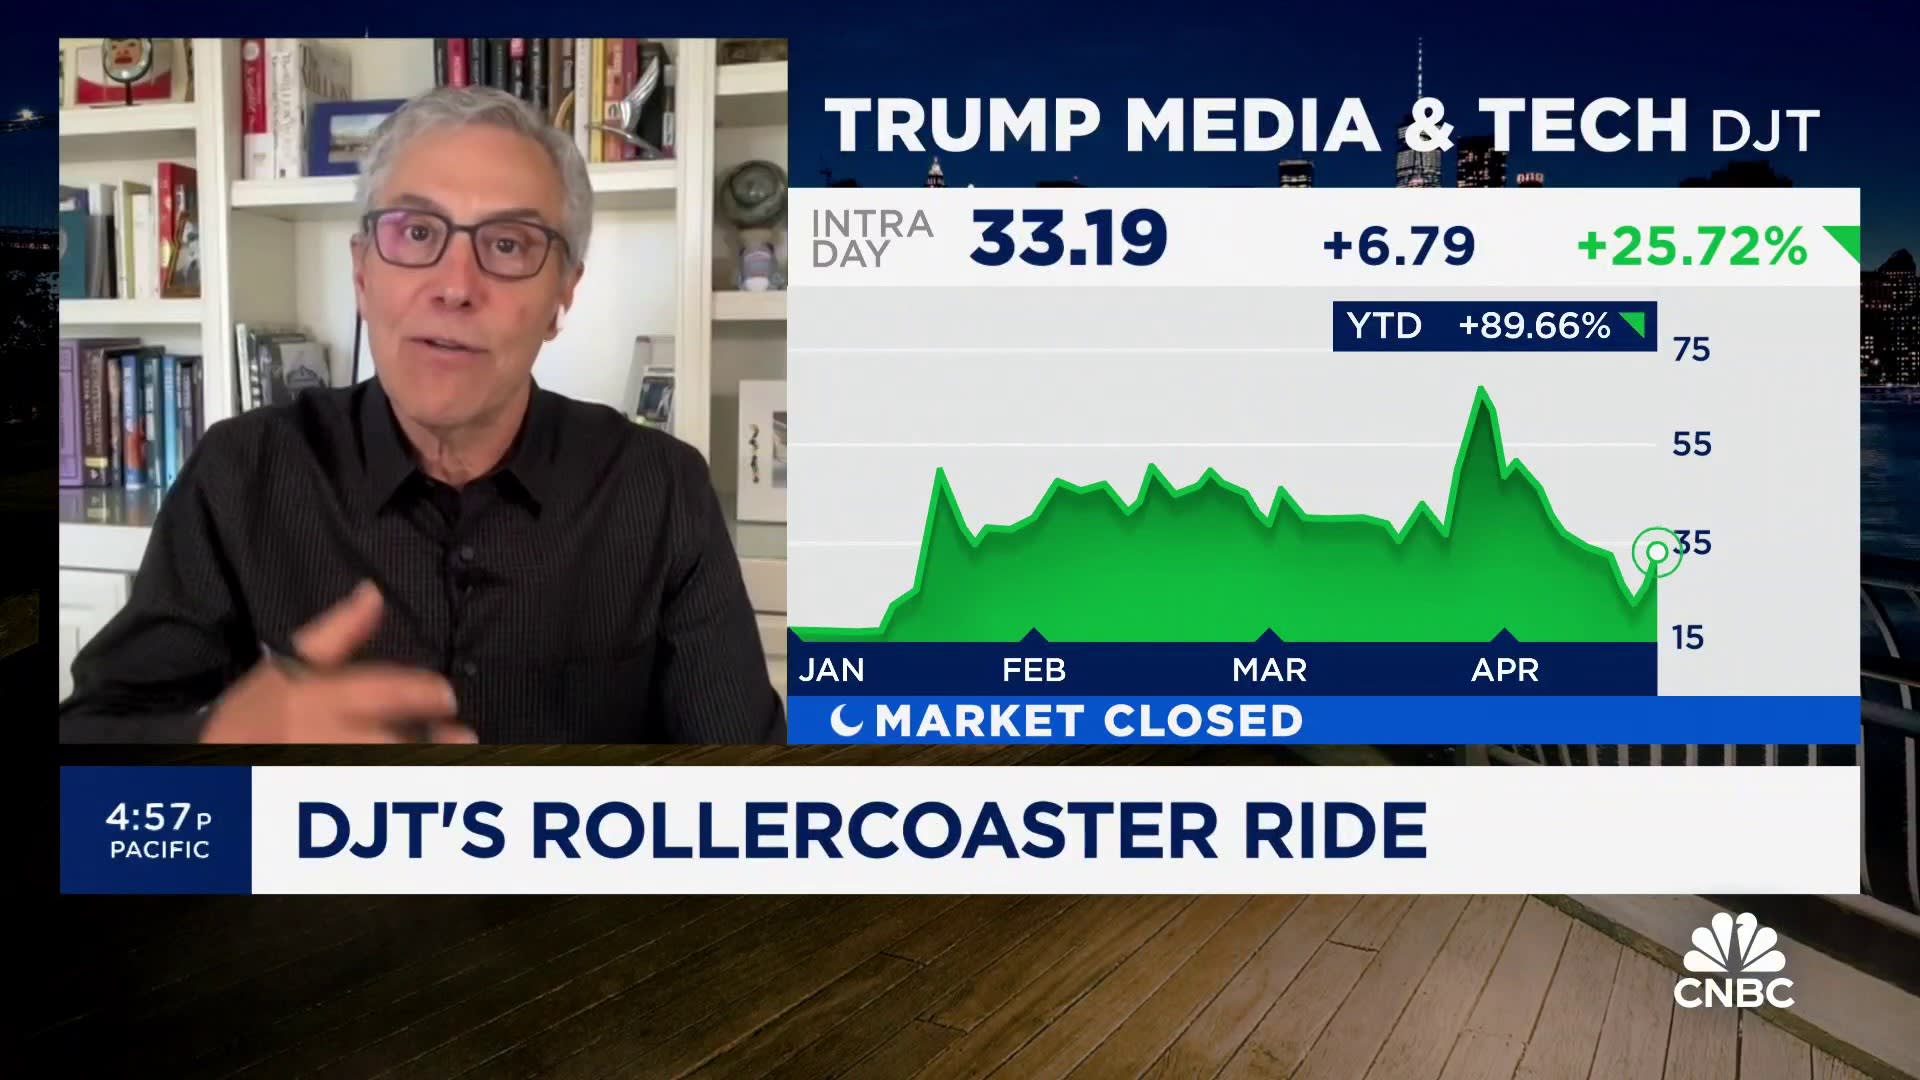 Trump fans aren't translating to customers for Truth Social, says Herb Greenberg on DJT stock